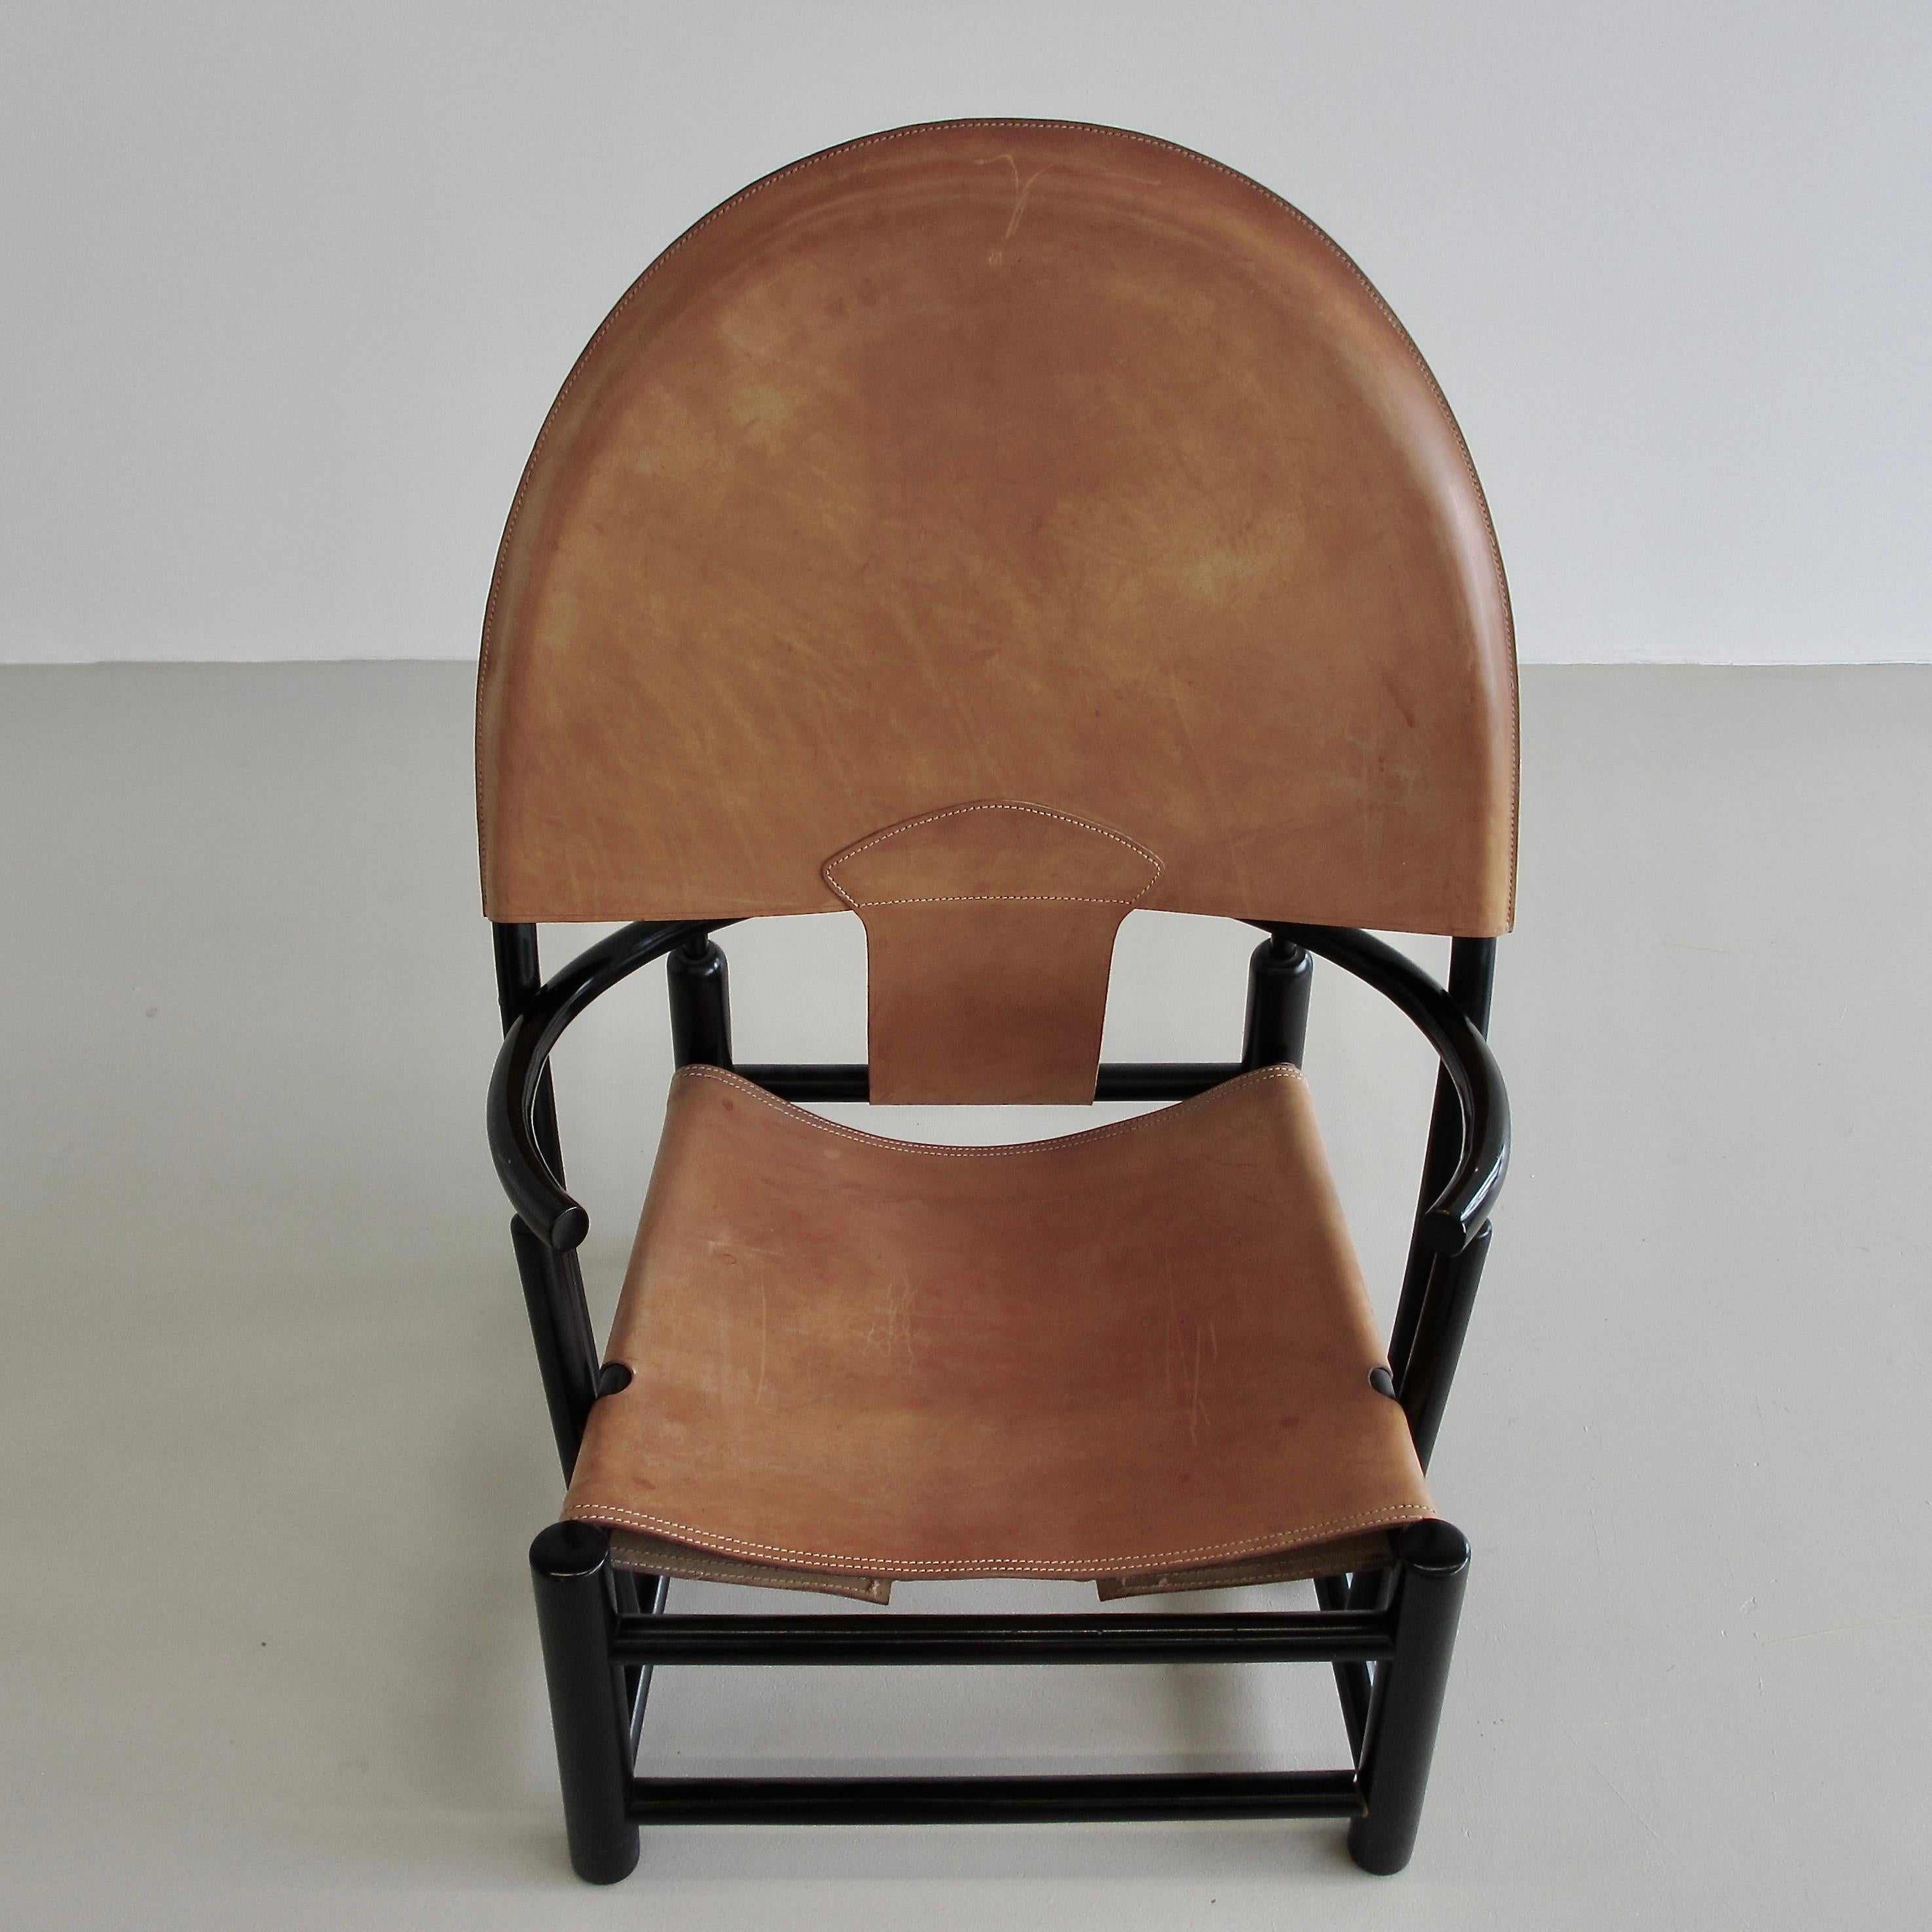 Armchair designed by Piero Palange and Werther Toffolon. Italy, Germa, 1972.

Black lacquered wooden frame with the original leather upholstery. This is model G23. Seat height: 35 cm.